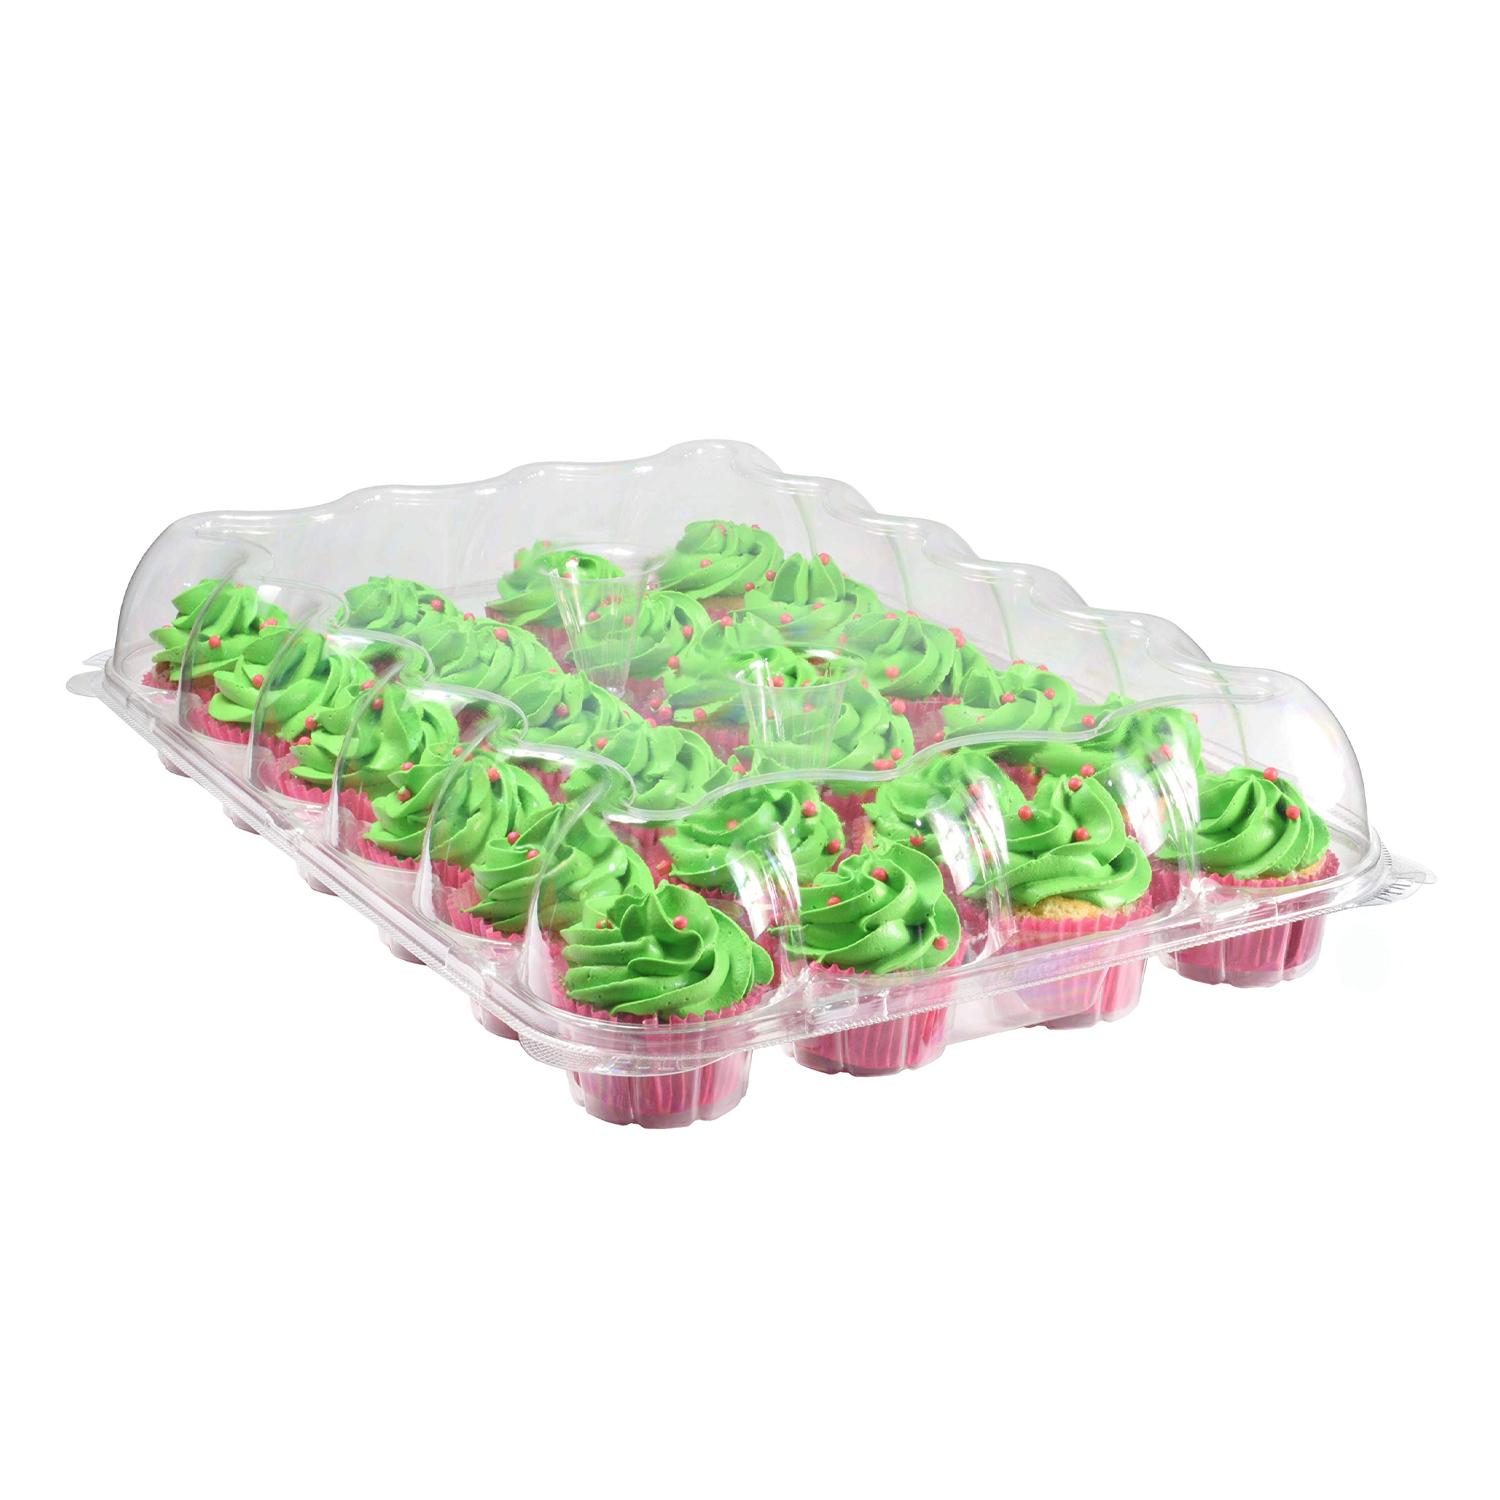 CLEAR PLASTIC CUPCAKE CONTAINER 24 CUP 110MM